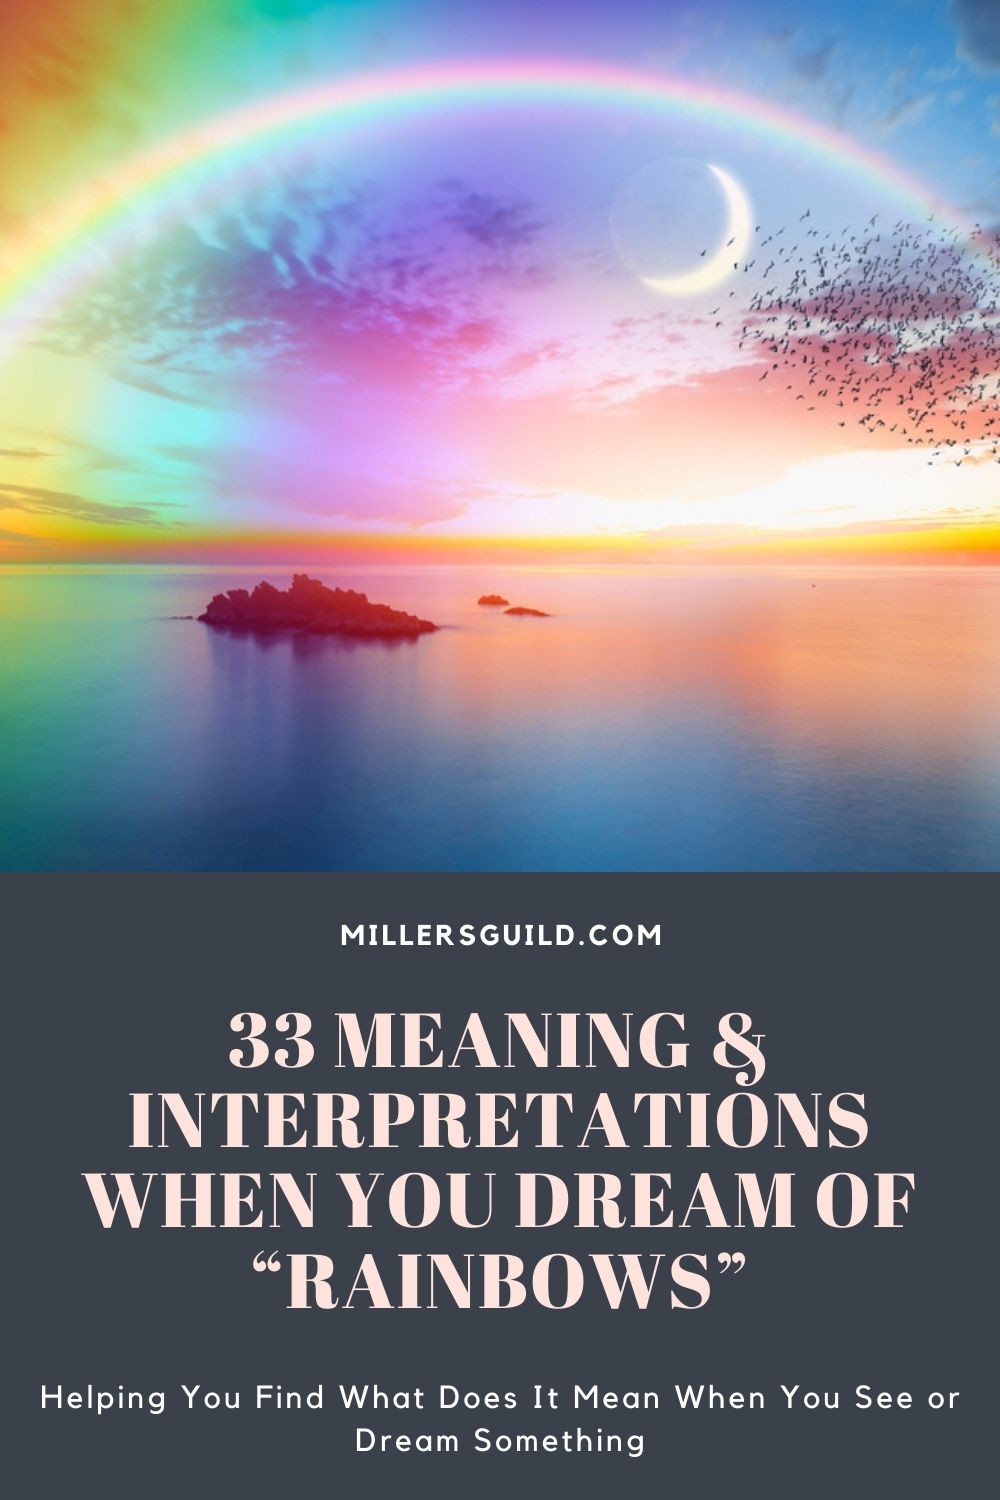 33 Meaning & Interpretations When You Dream Of “Rainbows” 2